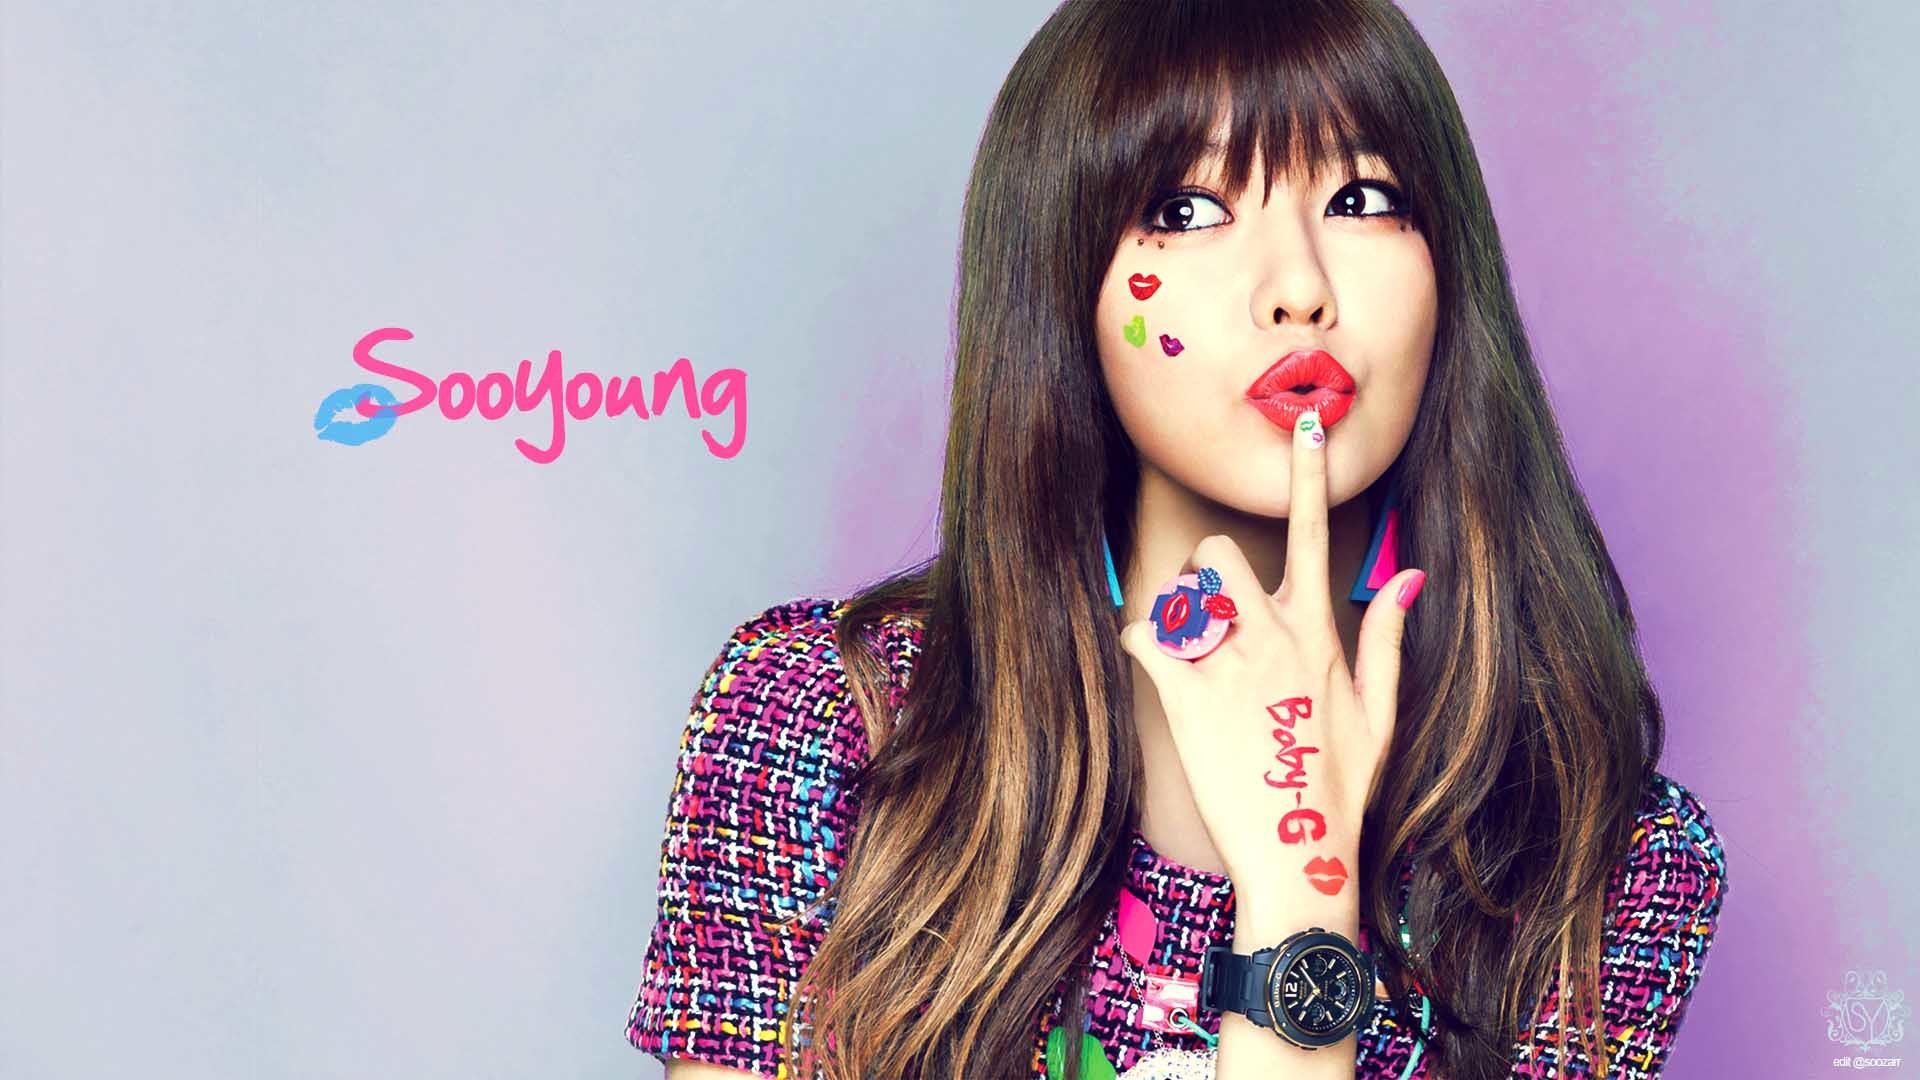 Sooyoung - Sexy Beauty [iPhone Wallpaper 7/7] by Cre4t1v31 on DeviantArt